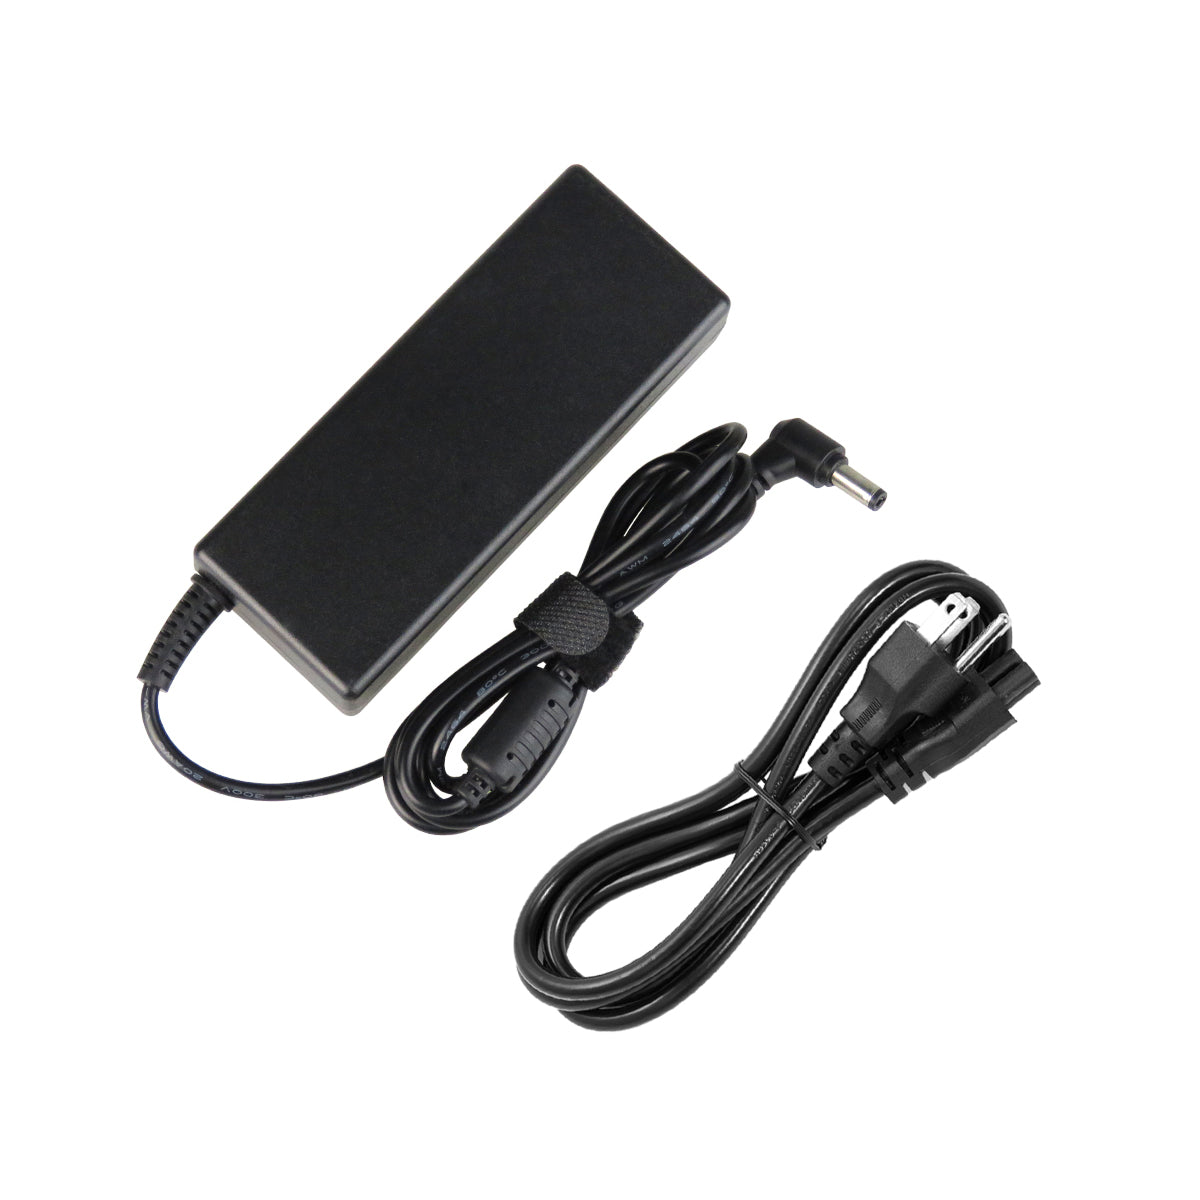 AC Adapter Charger for Lenovo Essential G570 Notebook.